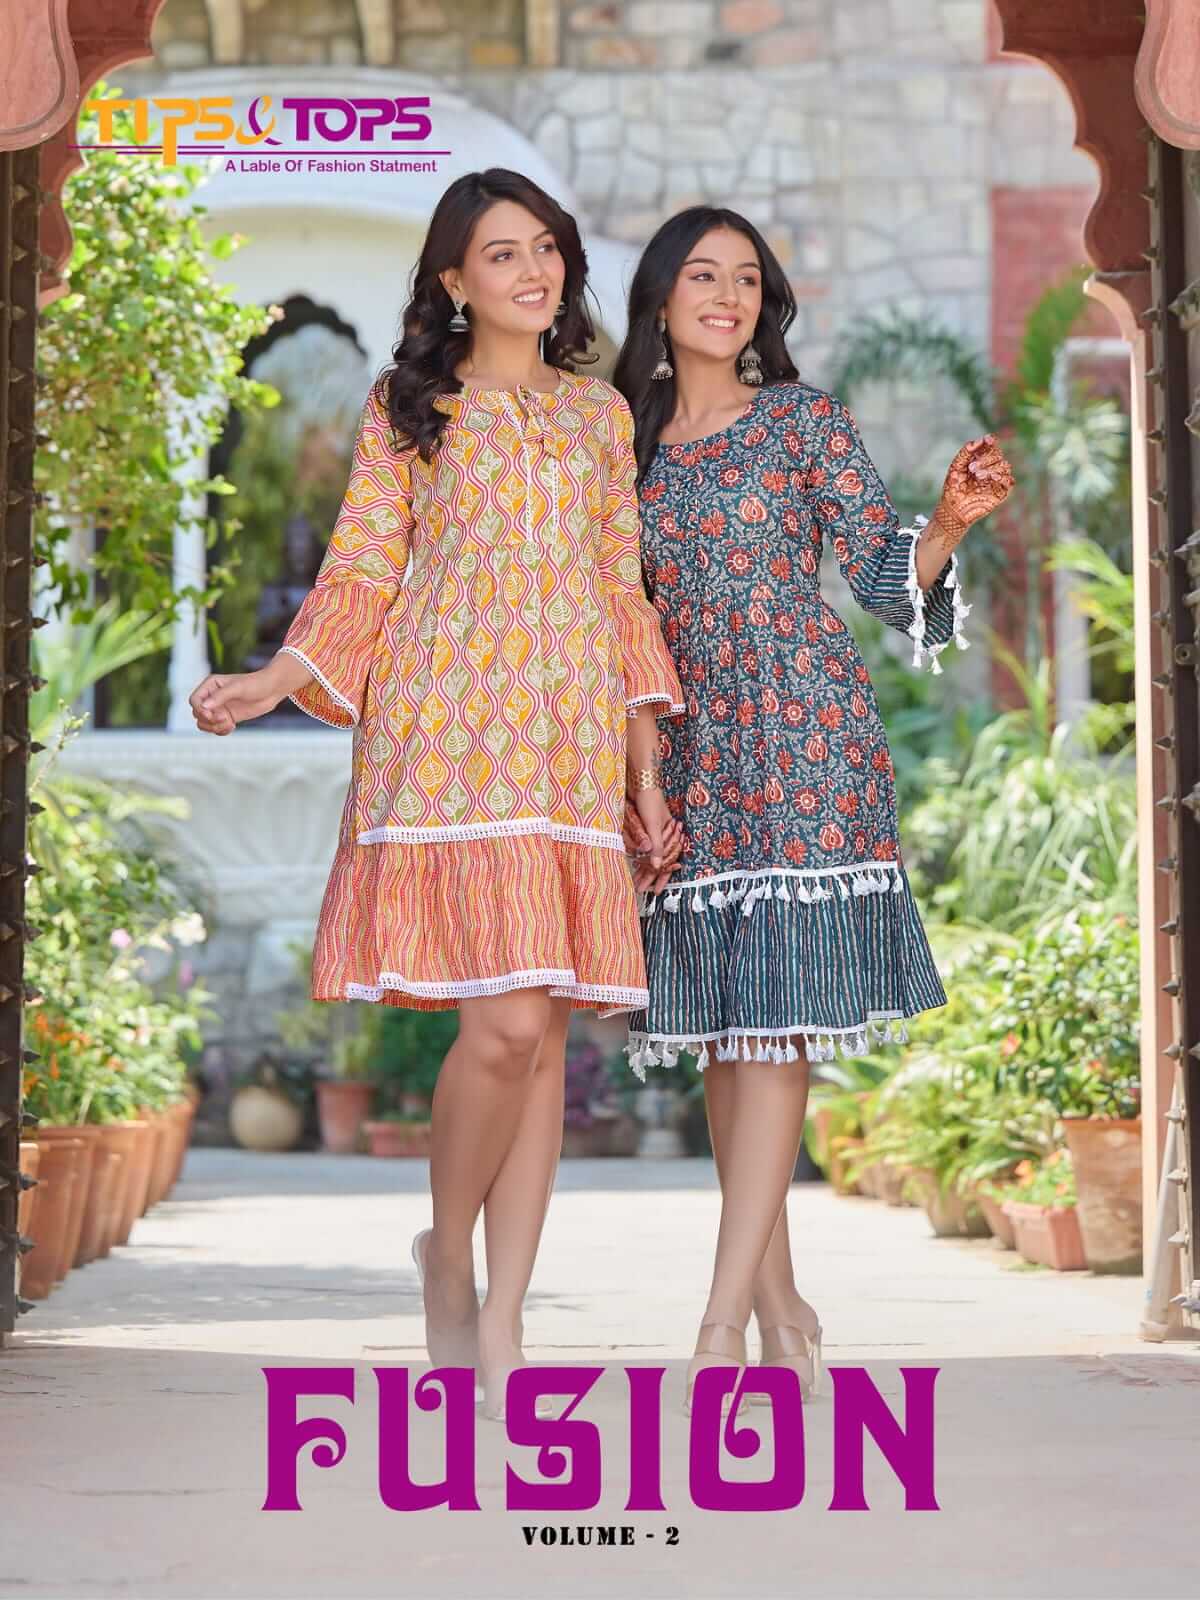 Tips And Tops Fusion Vol 2 One Piece Dress Catalog collection 7